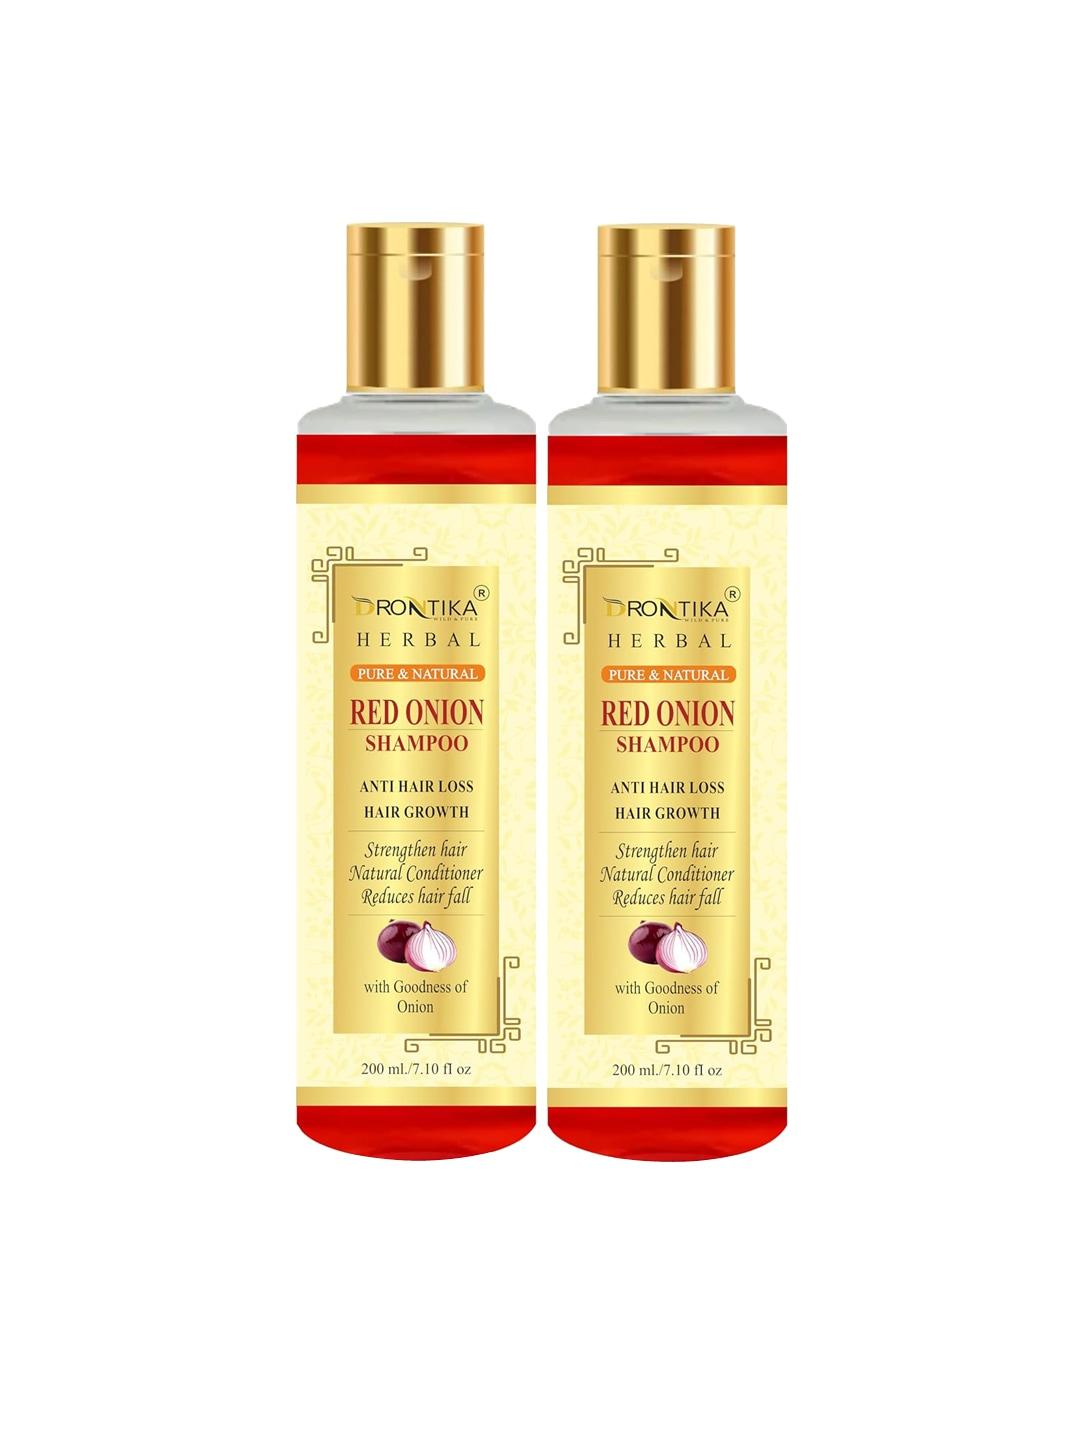 DRONTIKA Herbal Set of 2 Pure & Natural Red Onion Shampoo for Hair Growth - 200ml Each